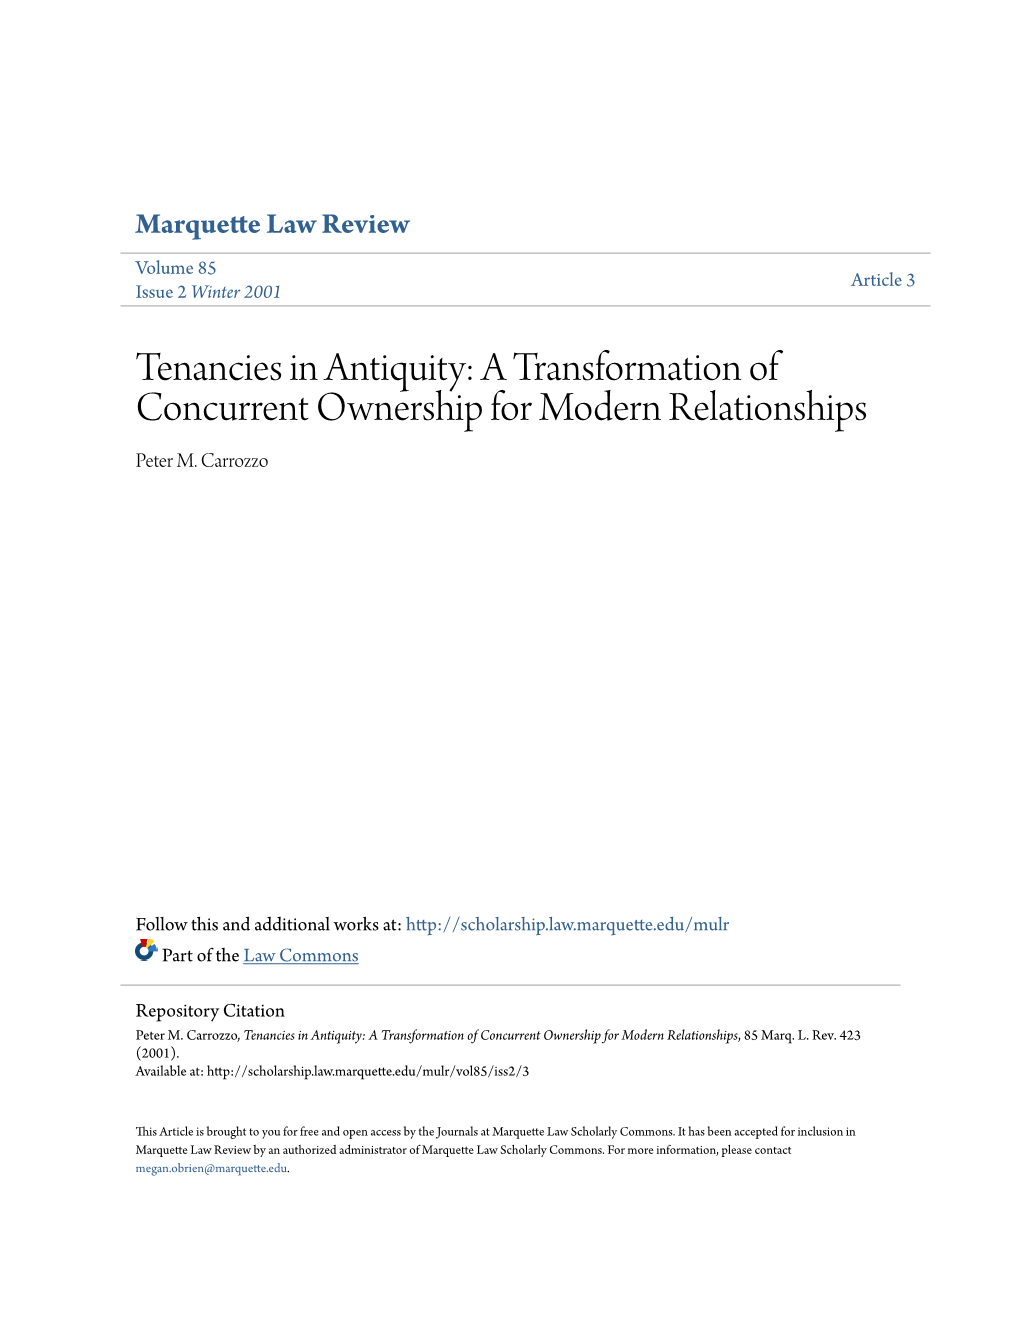 Tenancies in Antiquity: a Transformation of Concurrent Ownership for Modern Relationships Peter M